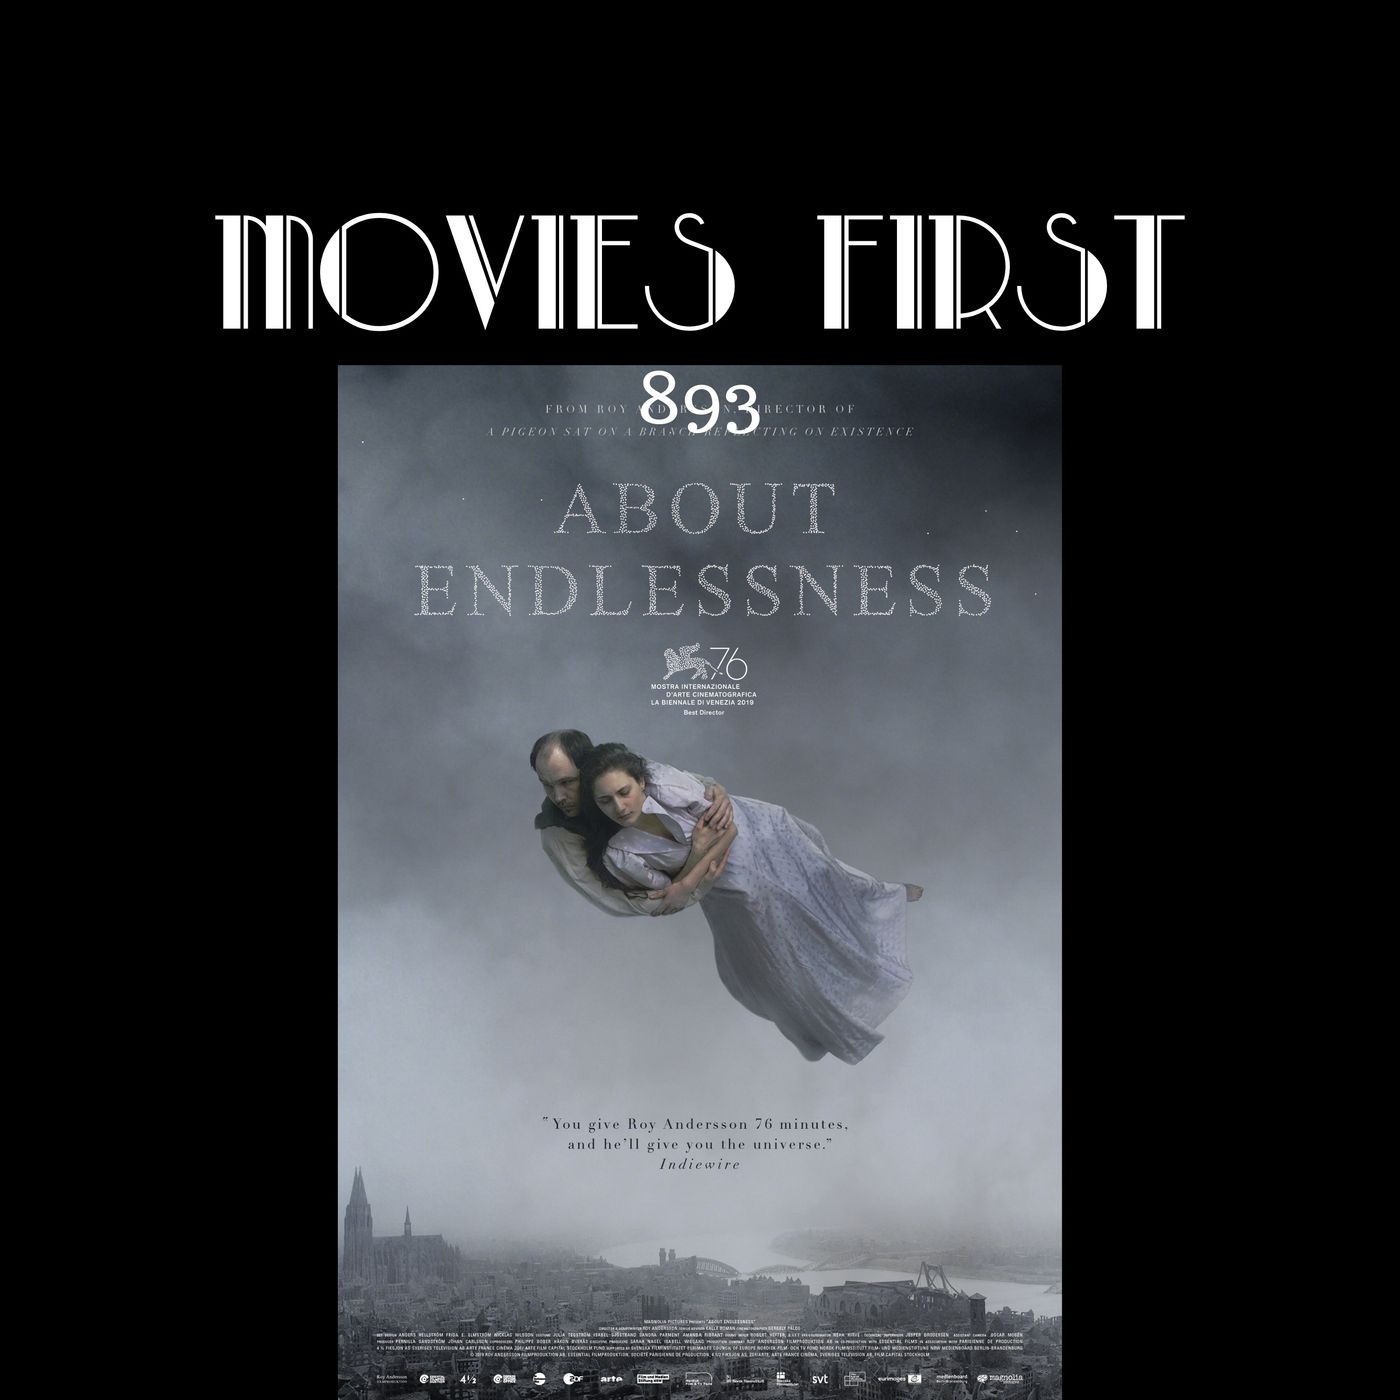 About Endlessness (Drama, Fantasy) (the @MoviesFirst review)